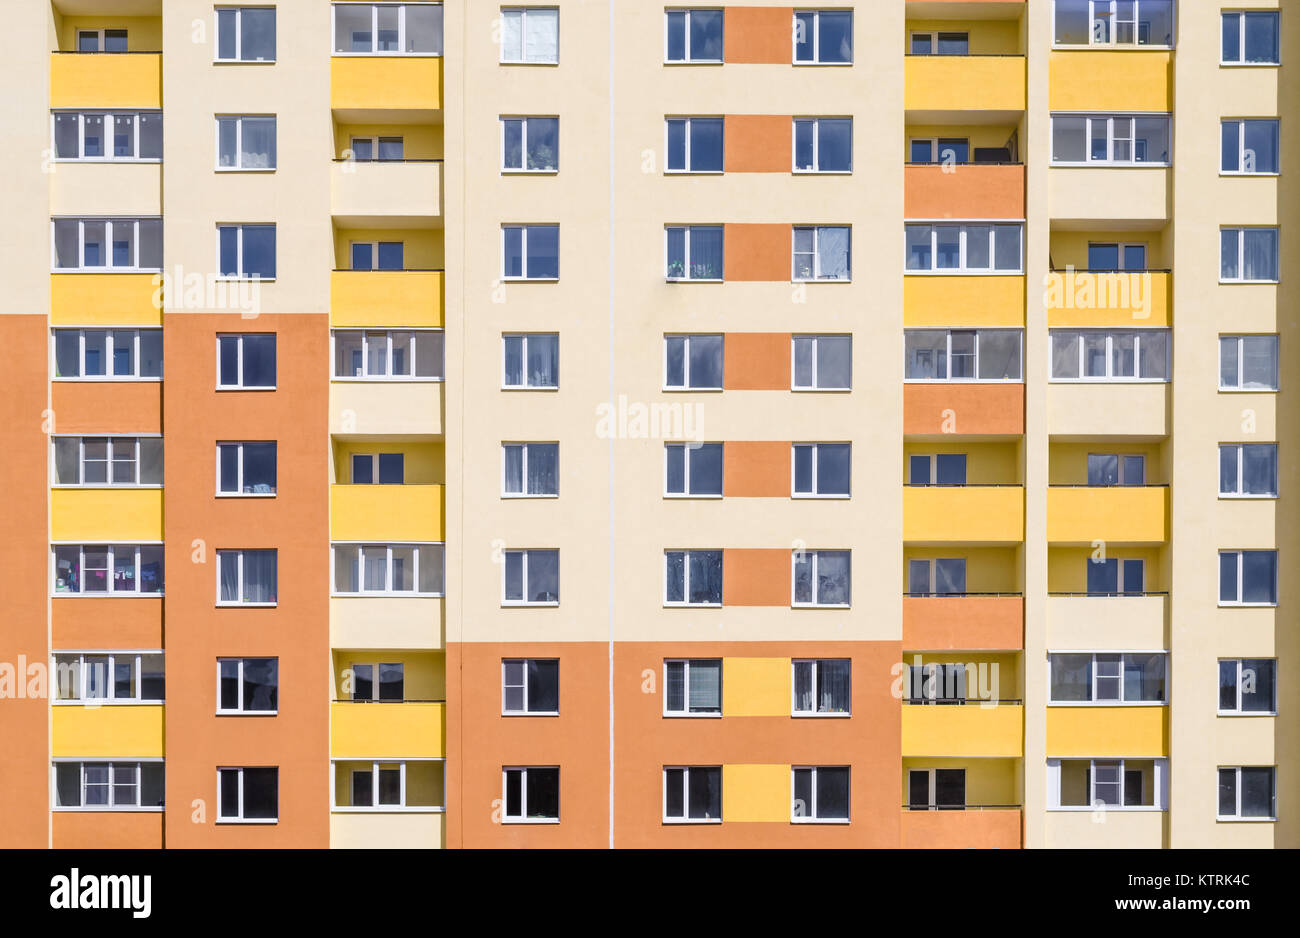 Many Apartments in Building. Stock Photo